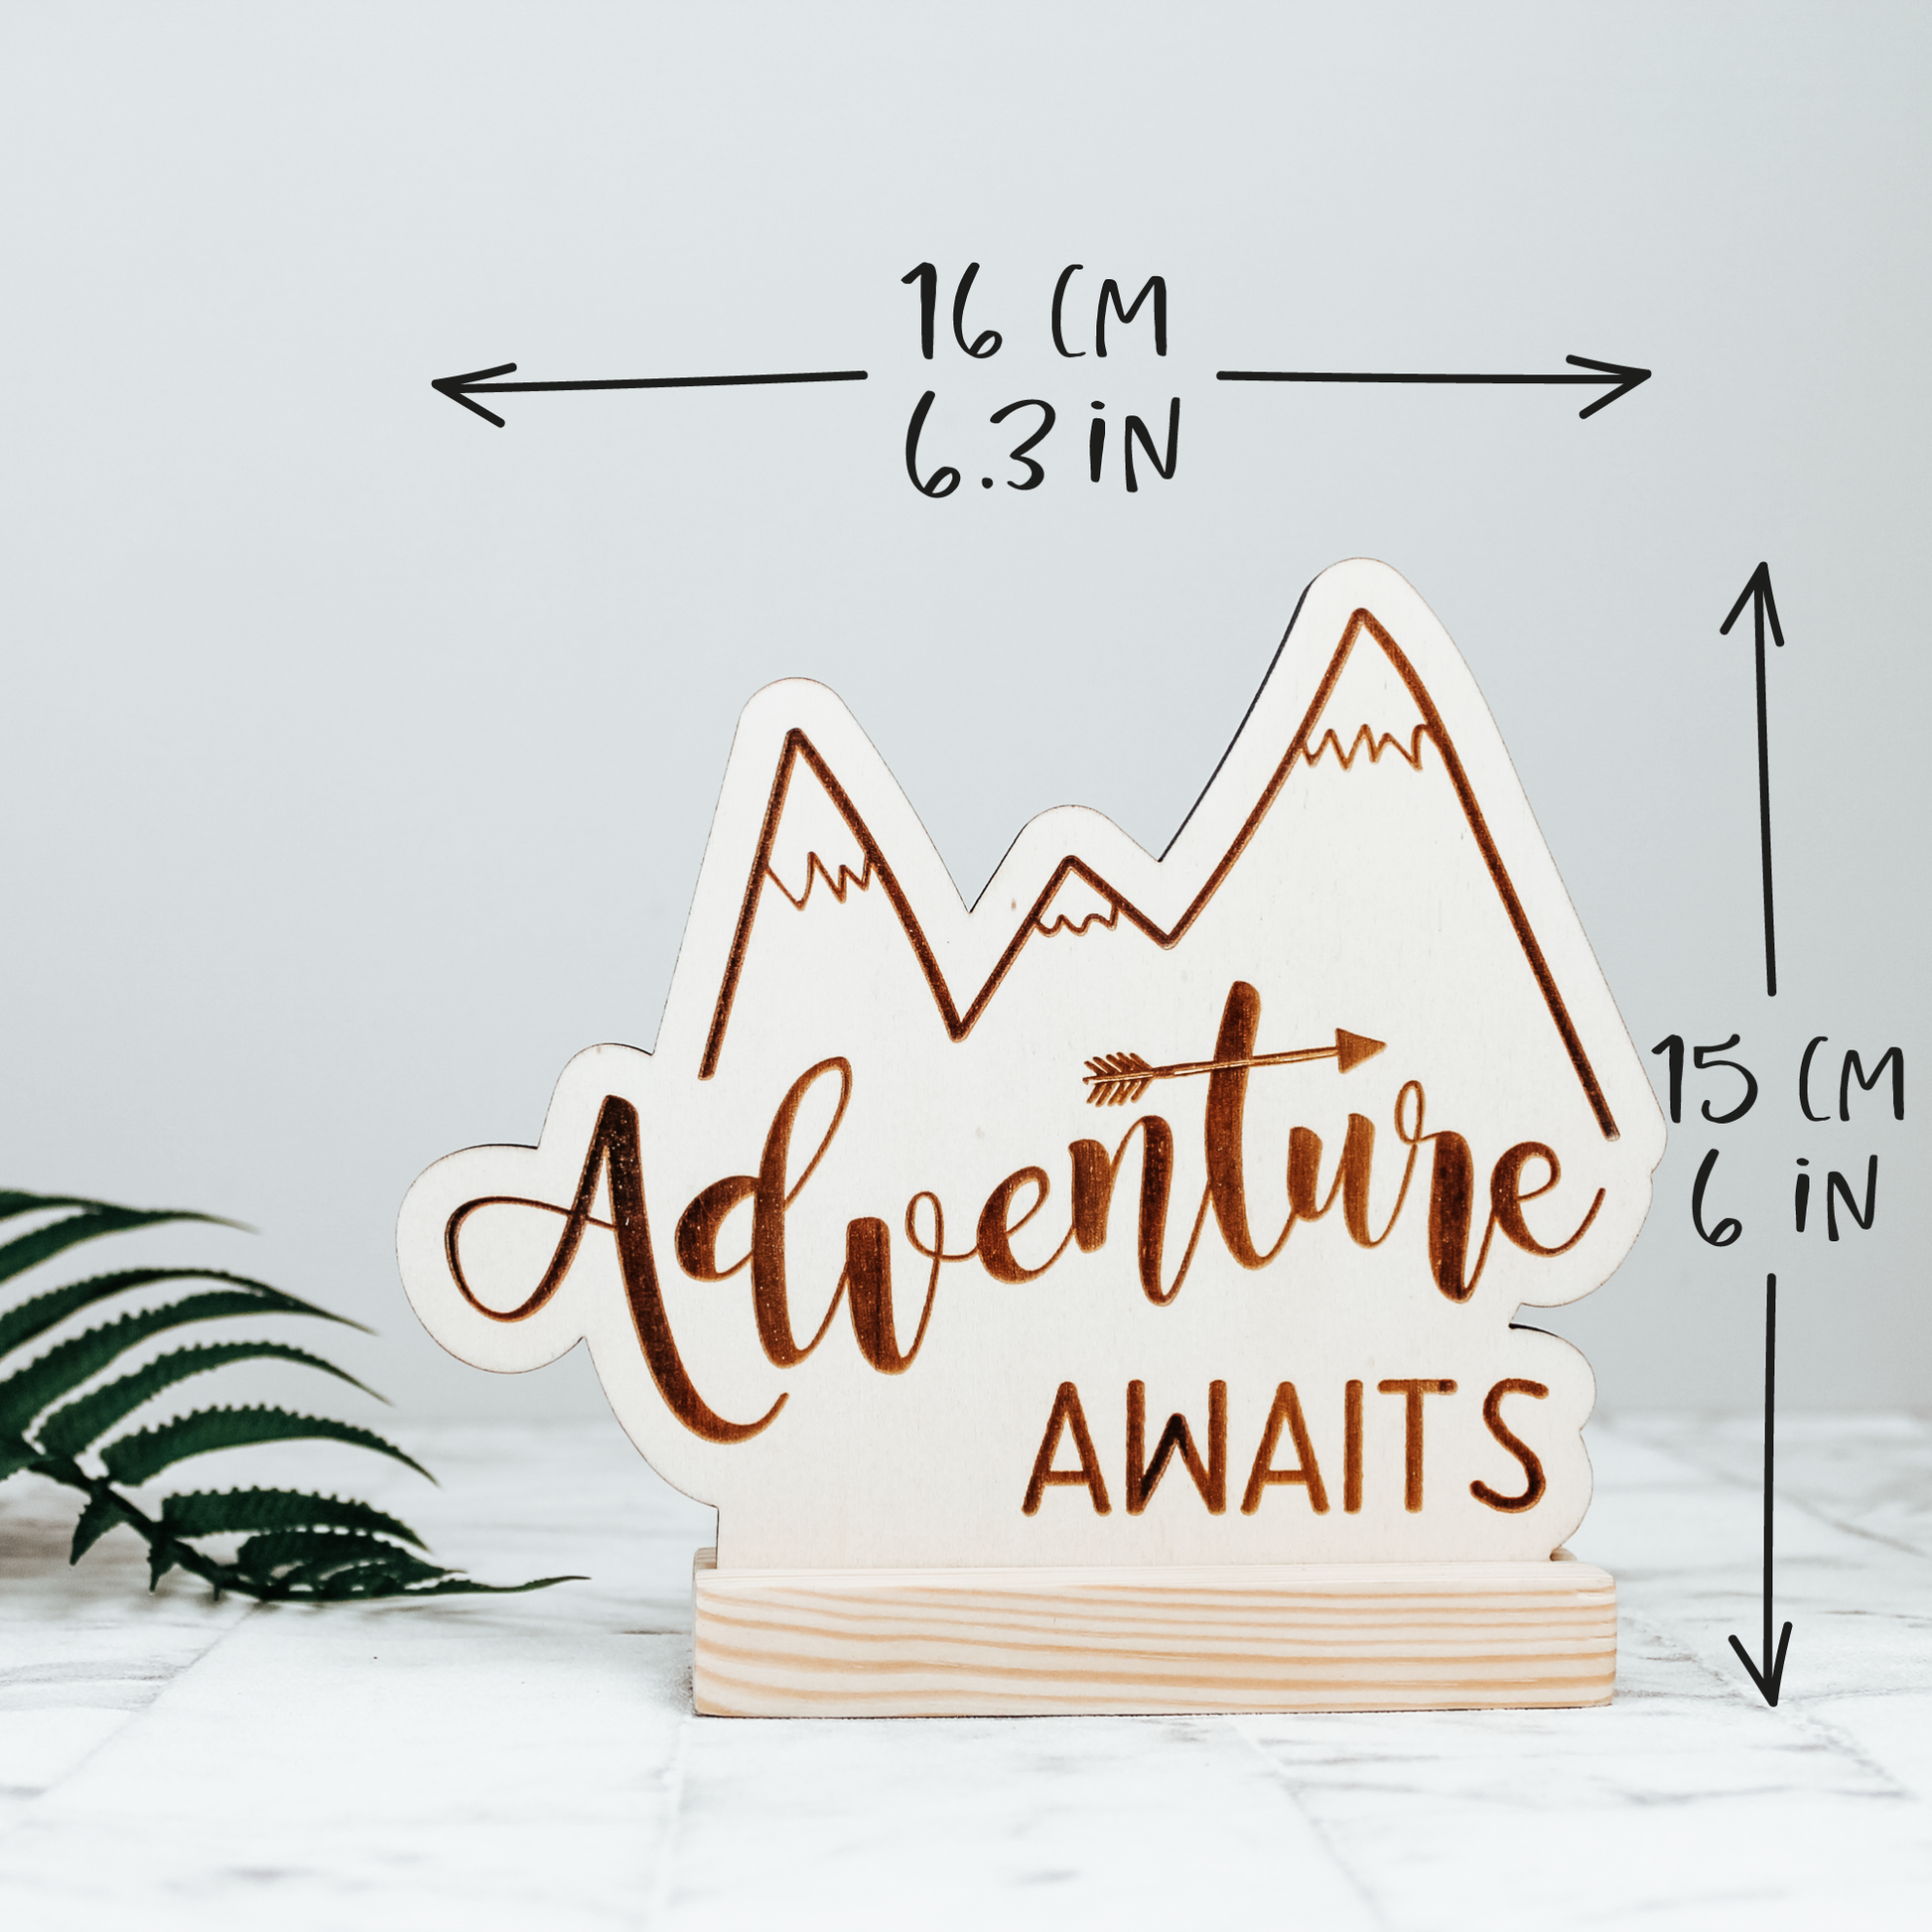 neutral colour wooden adventure awaits sign with added measurements 16cm long and 15 cm high